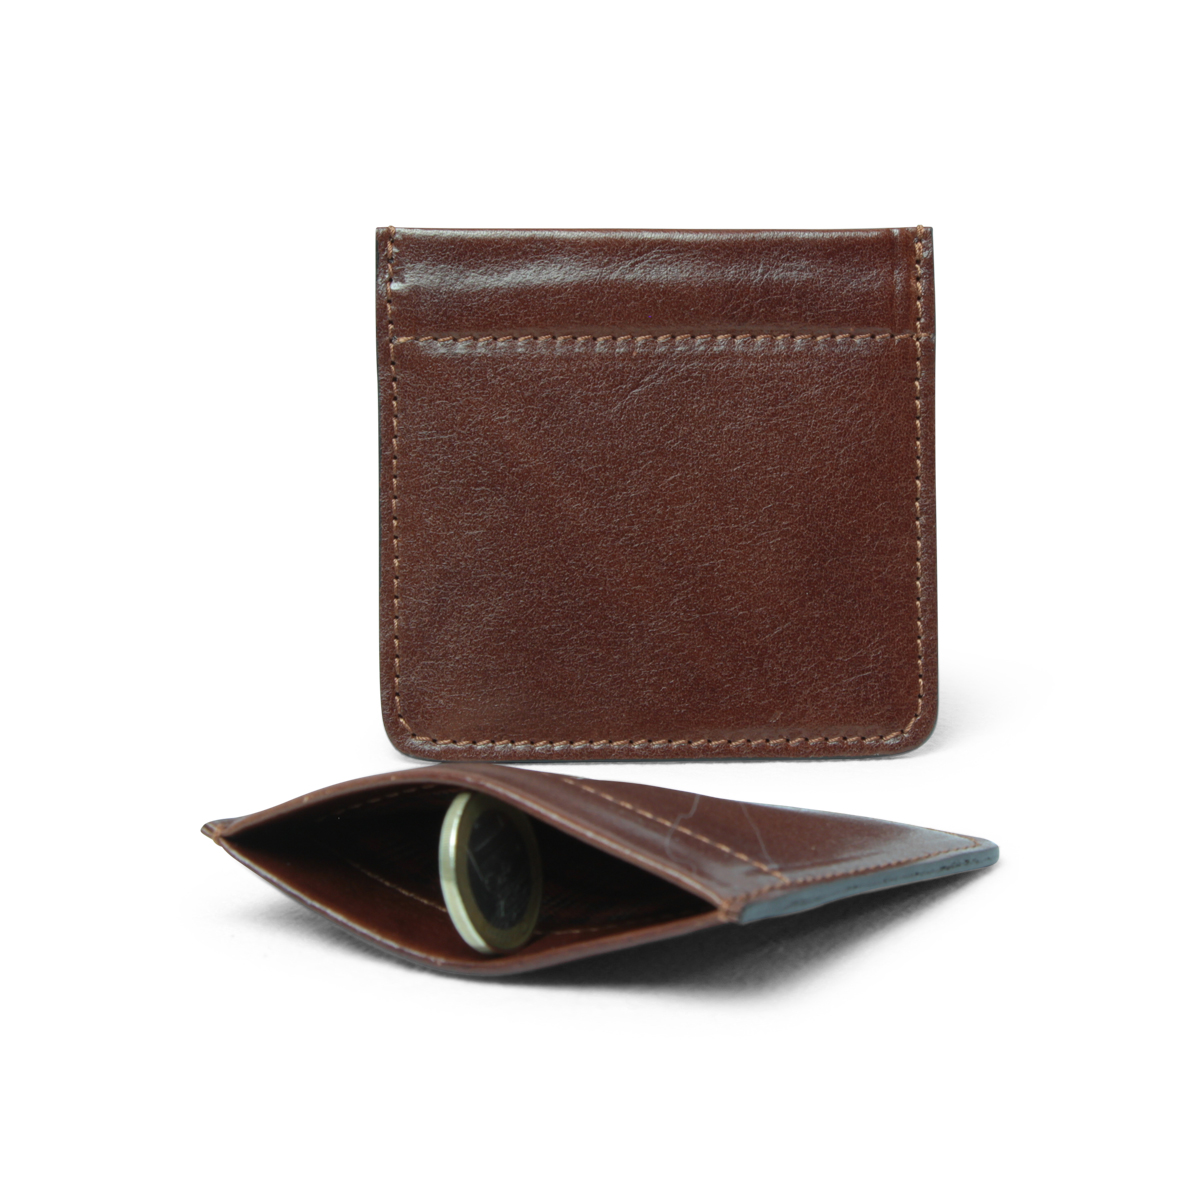 Leather coin purse - brown|806793MA|Old Angler Firenze